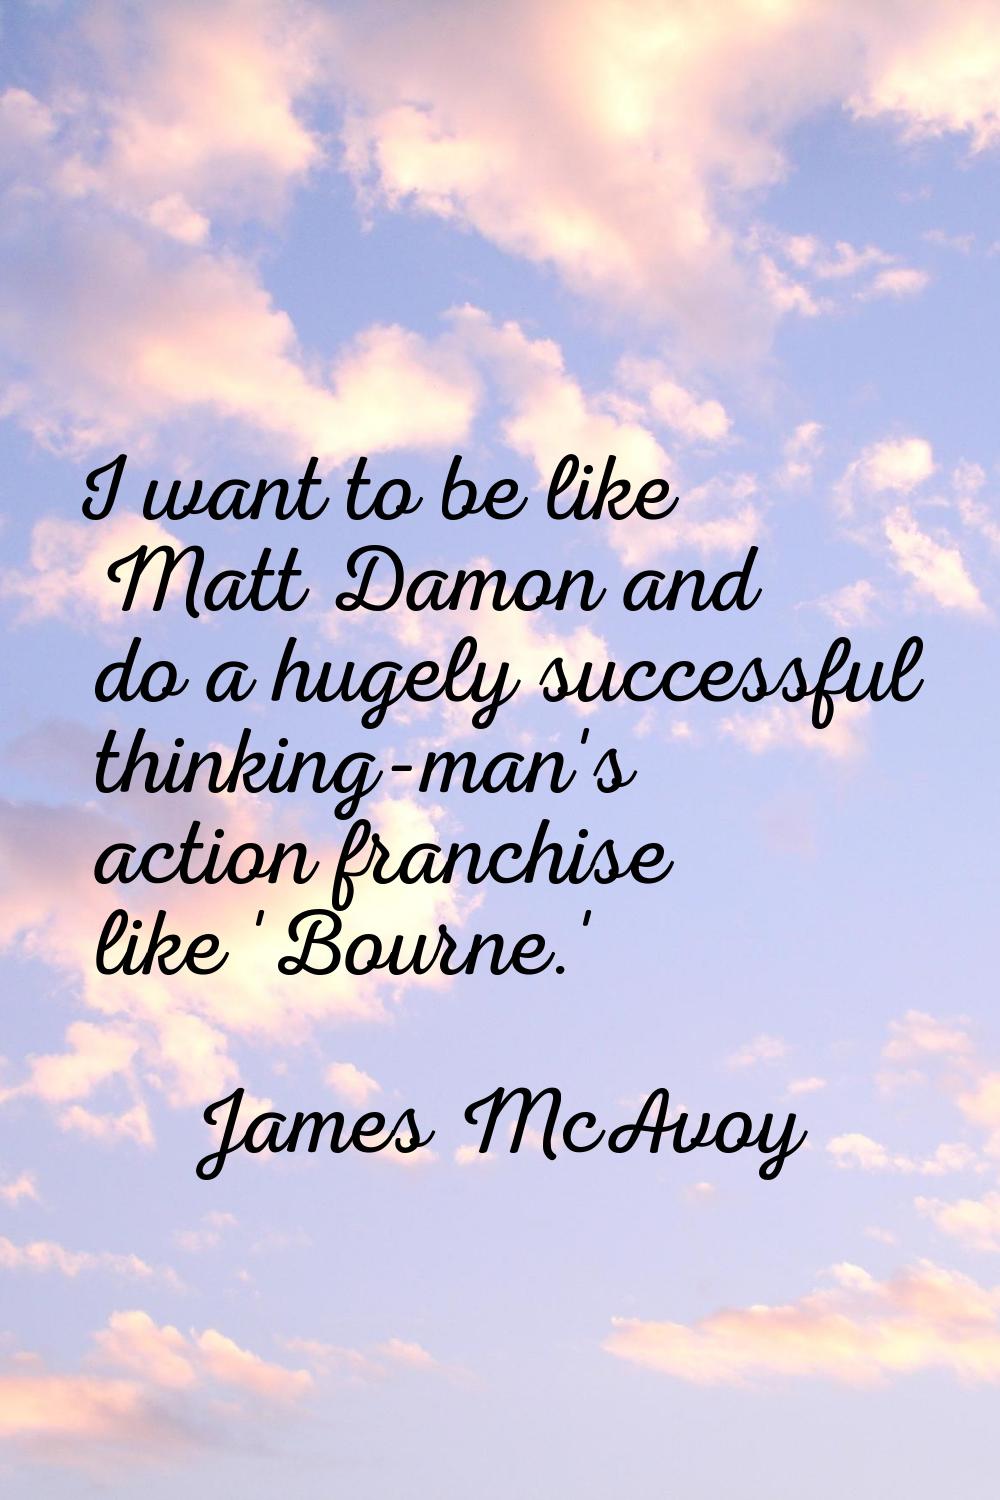 I want to be like Matt Damon and do a hugely successful thinking-man's action franchise like 'Bourn